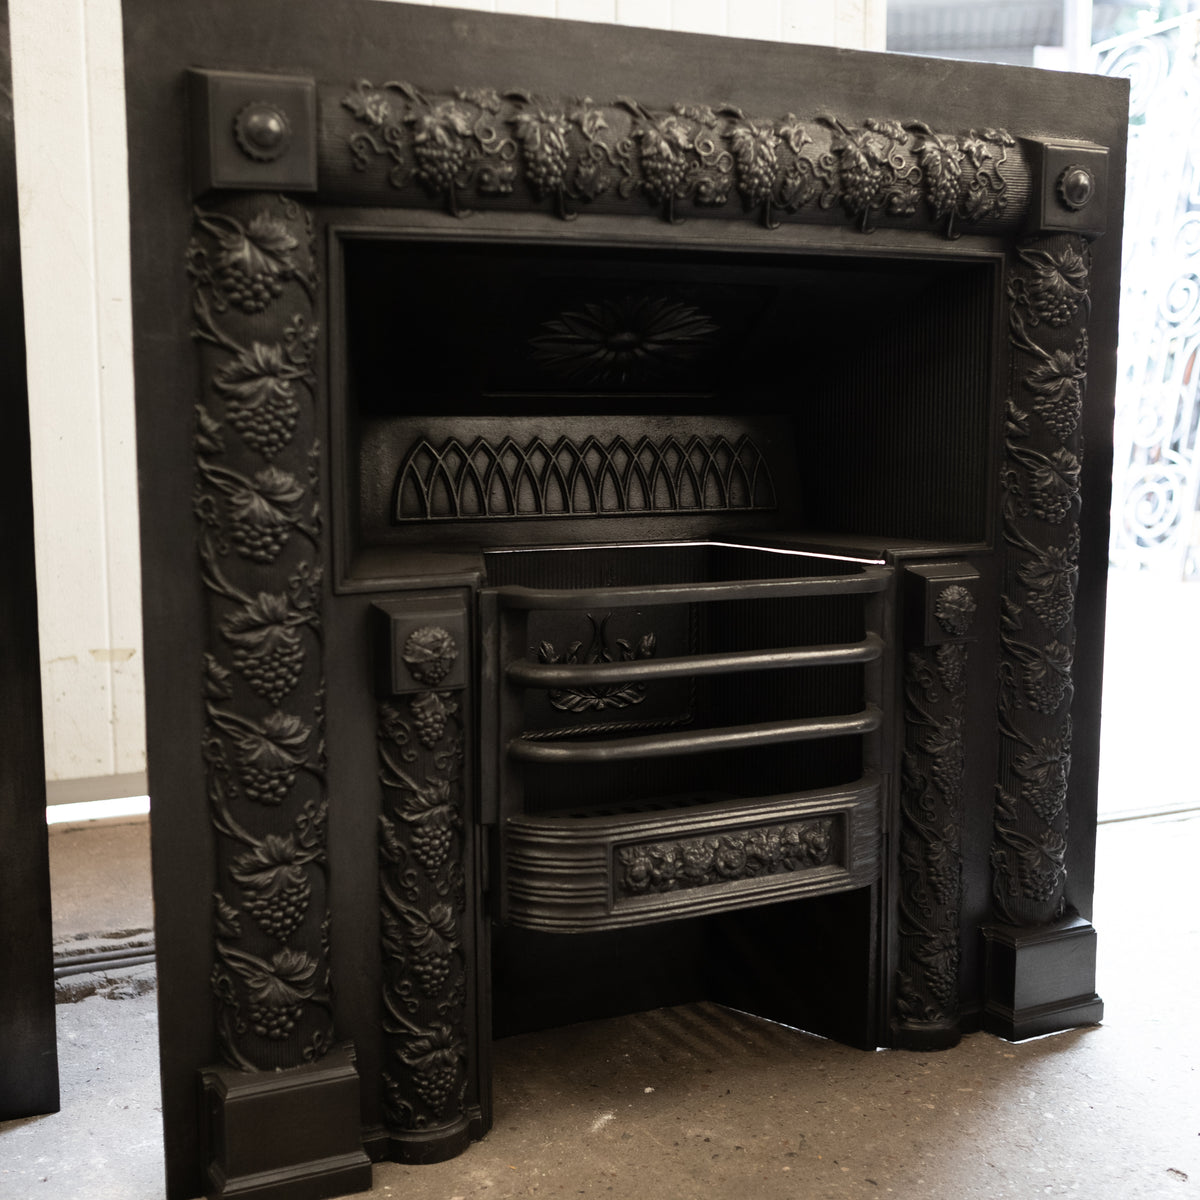 Reclaimed Ornate Georgian Style Cast Iron Fireplace Insert | The Architectural Forum